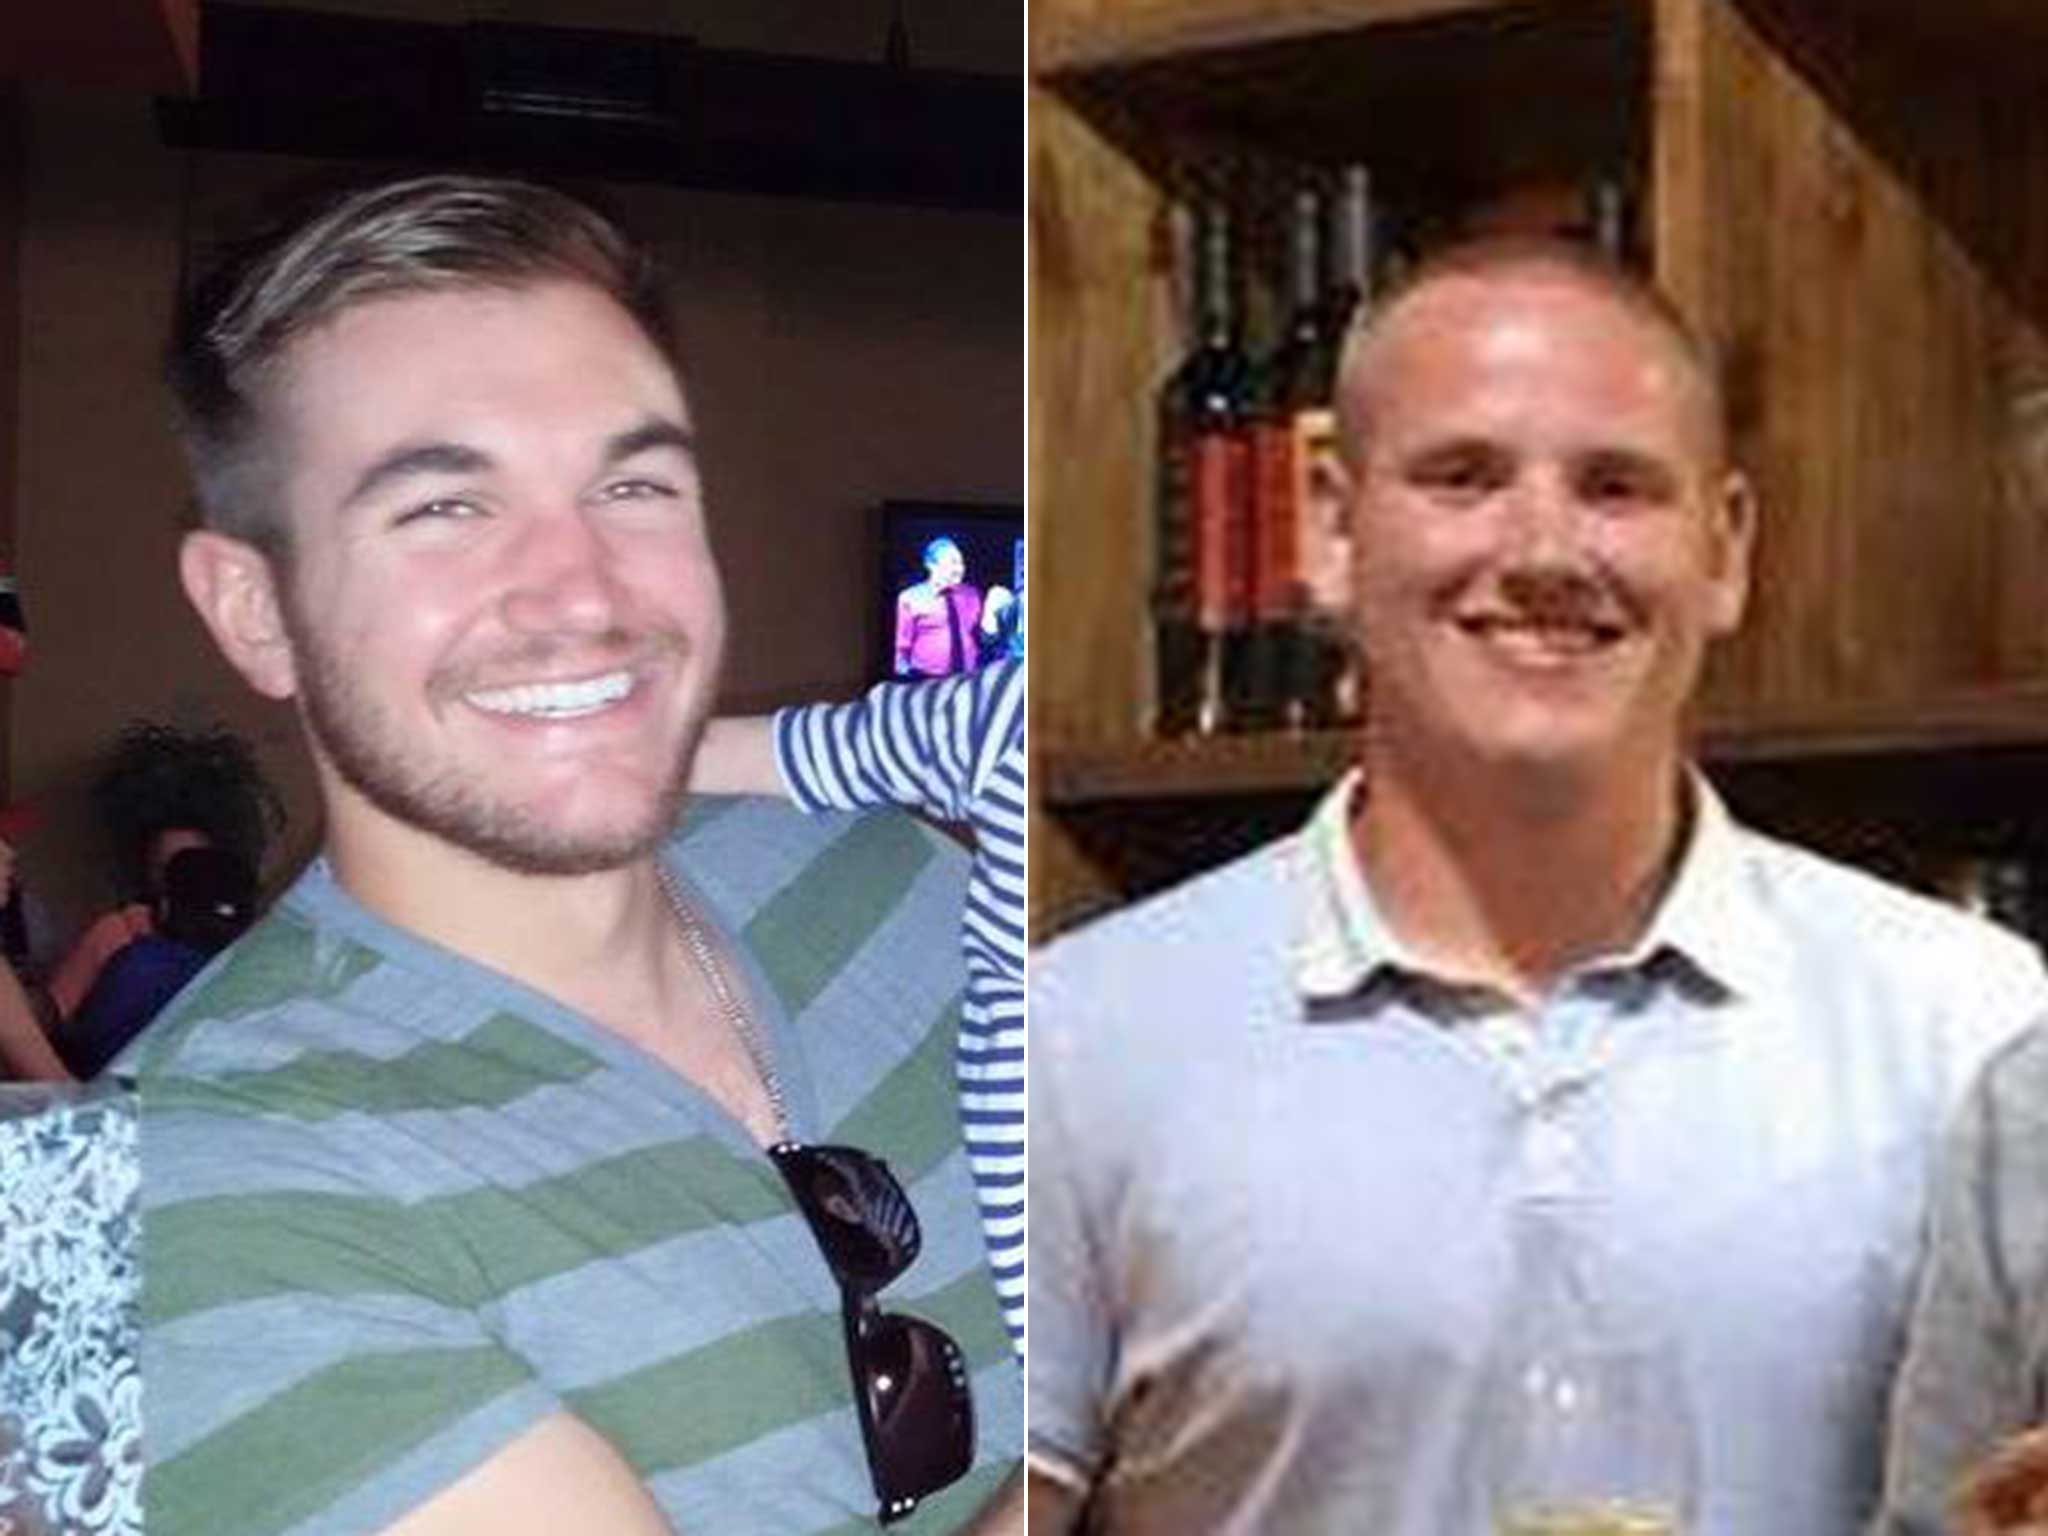 Alek Skarlatos (left) and Spencer Stone (right) tackled the gunman and subdued him on the train